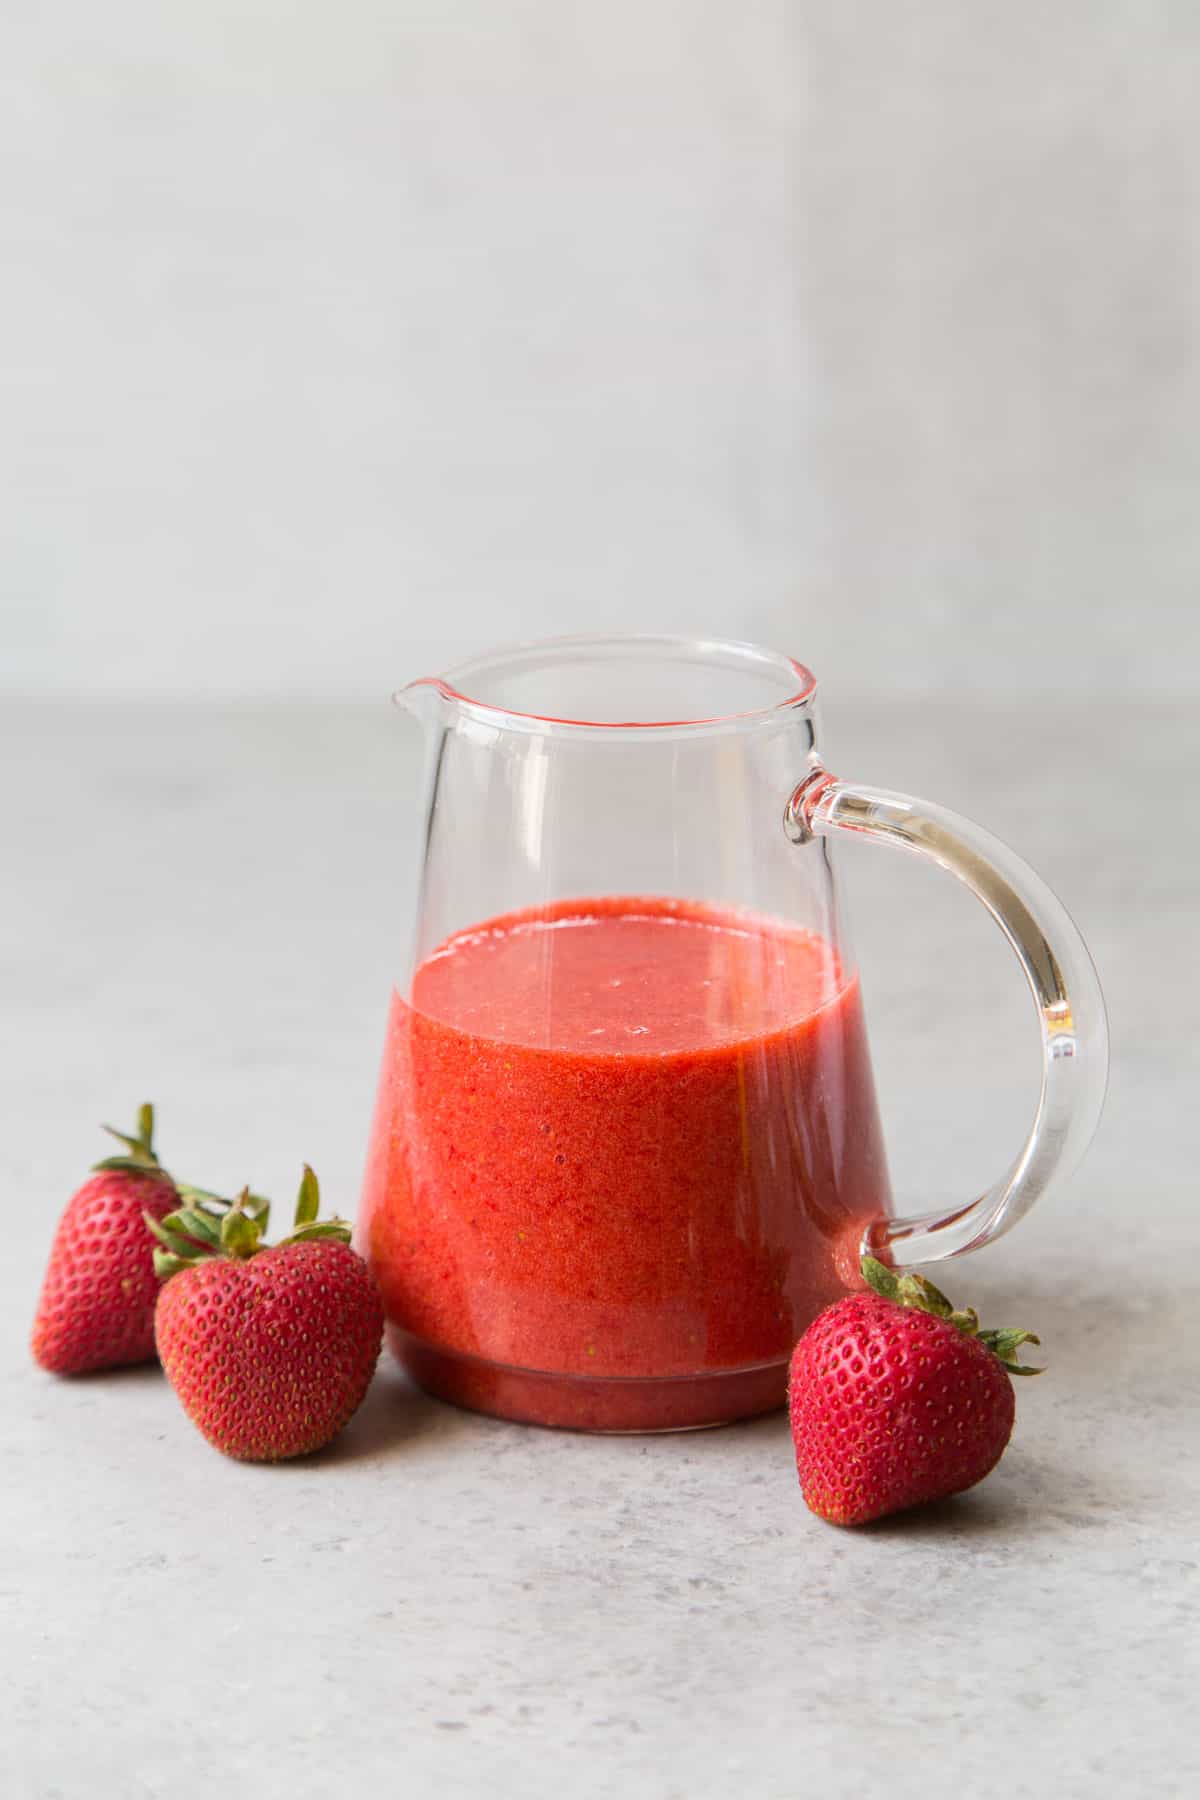 vibrant red fresh strawberry sauce in small pitcher.